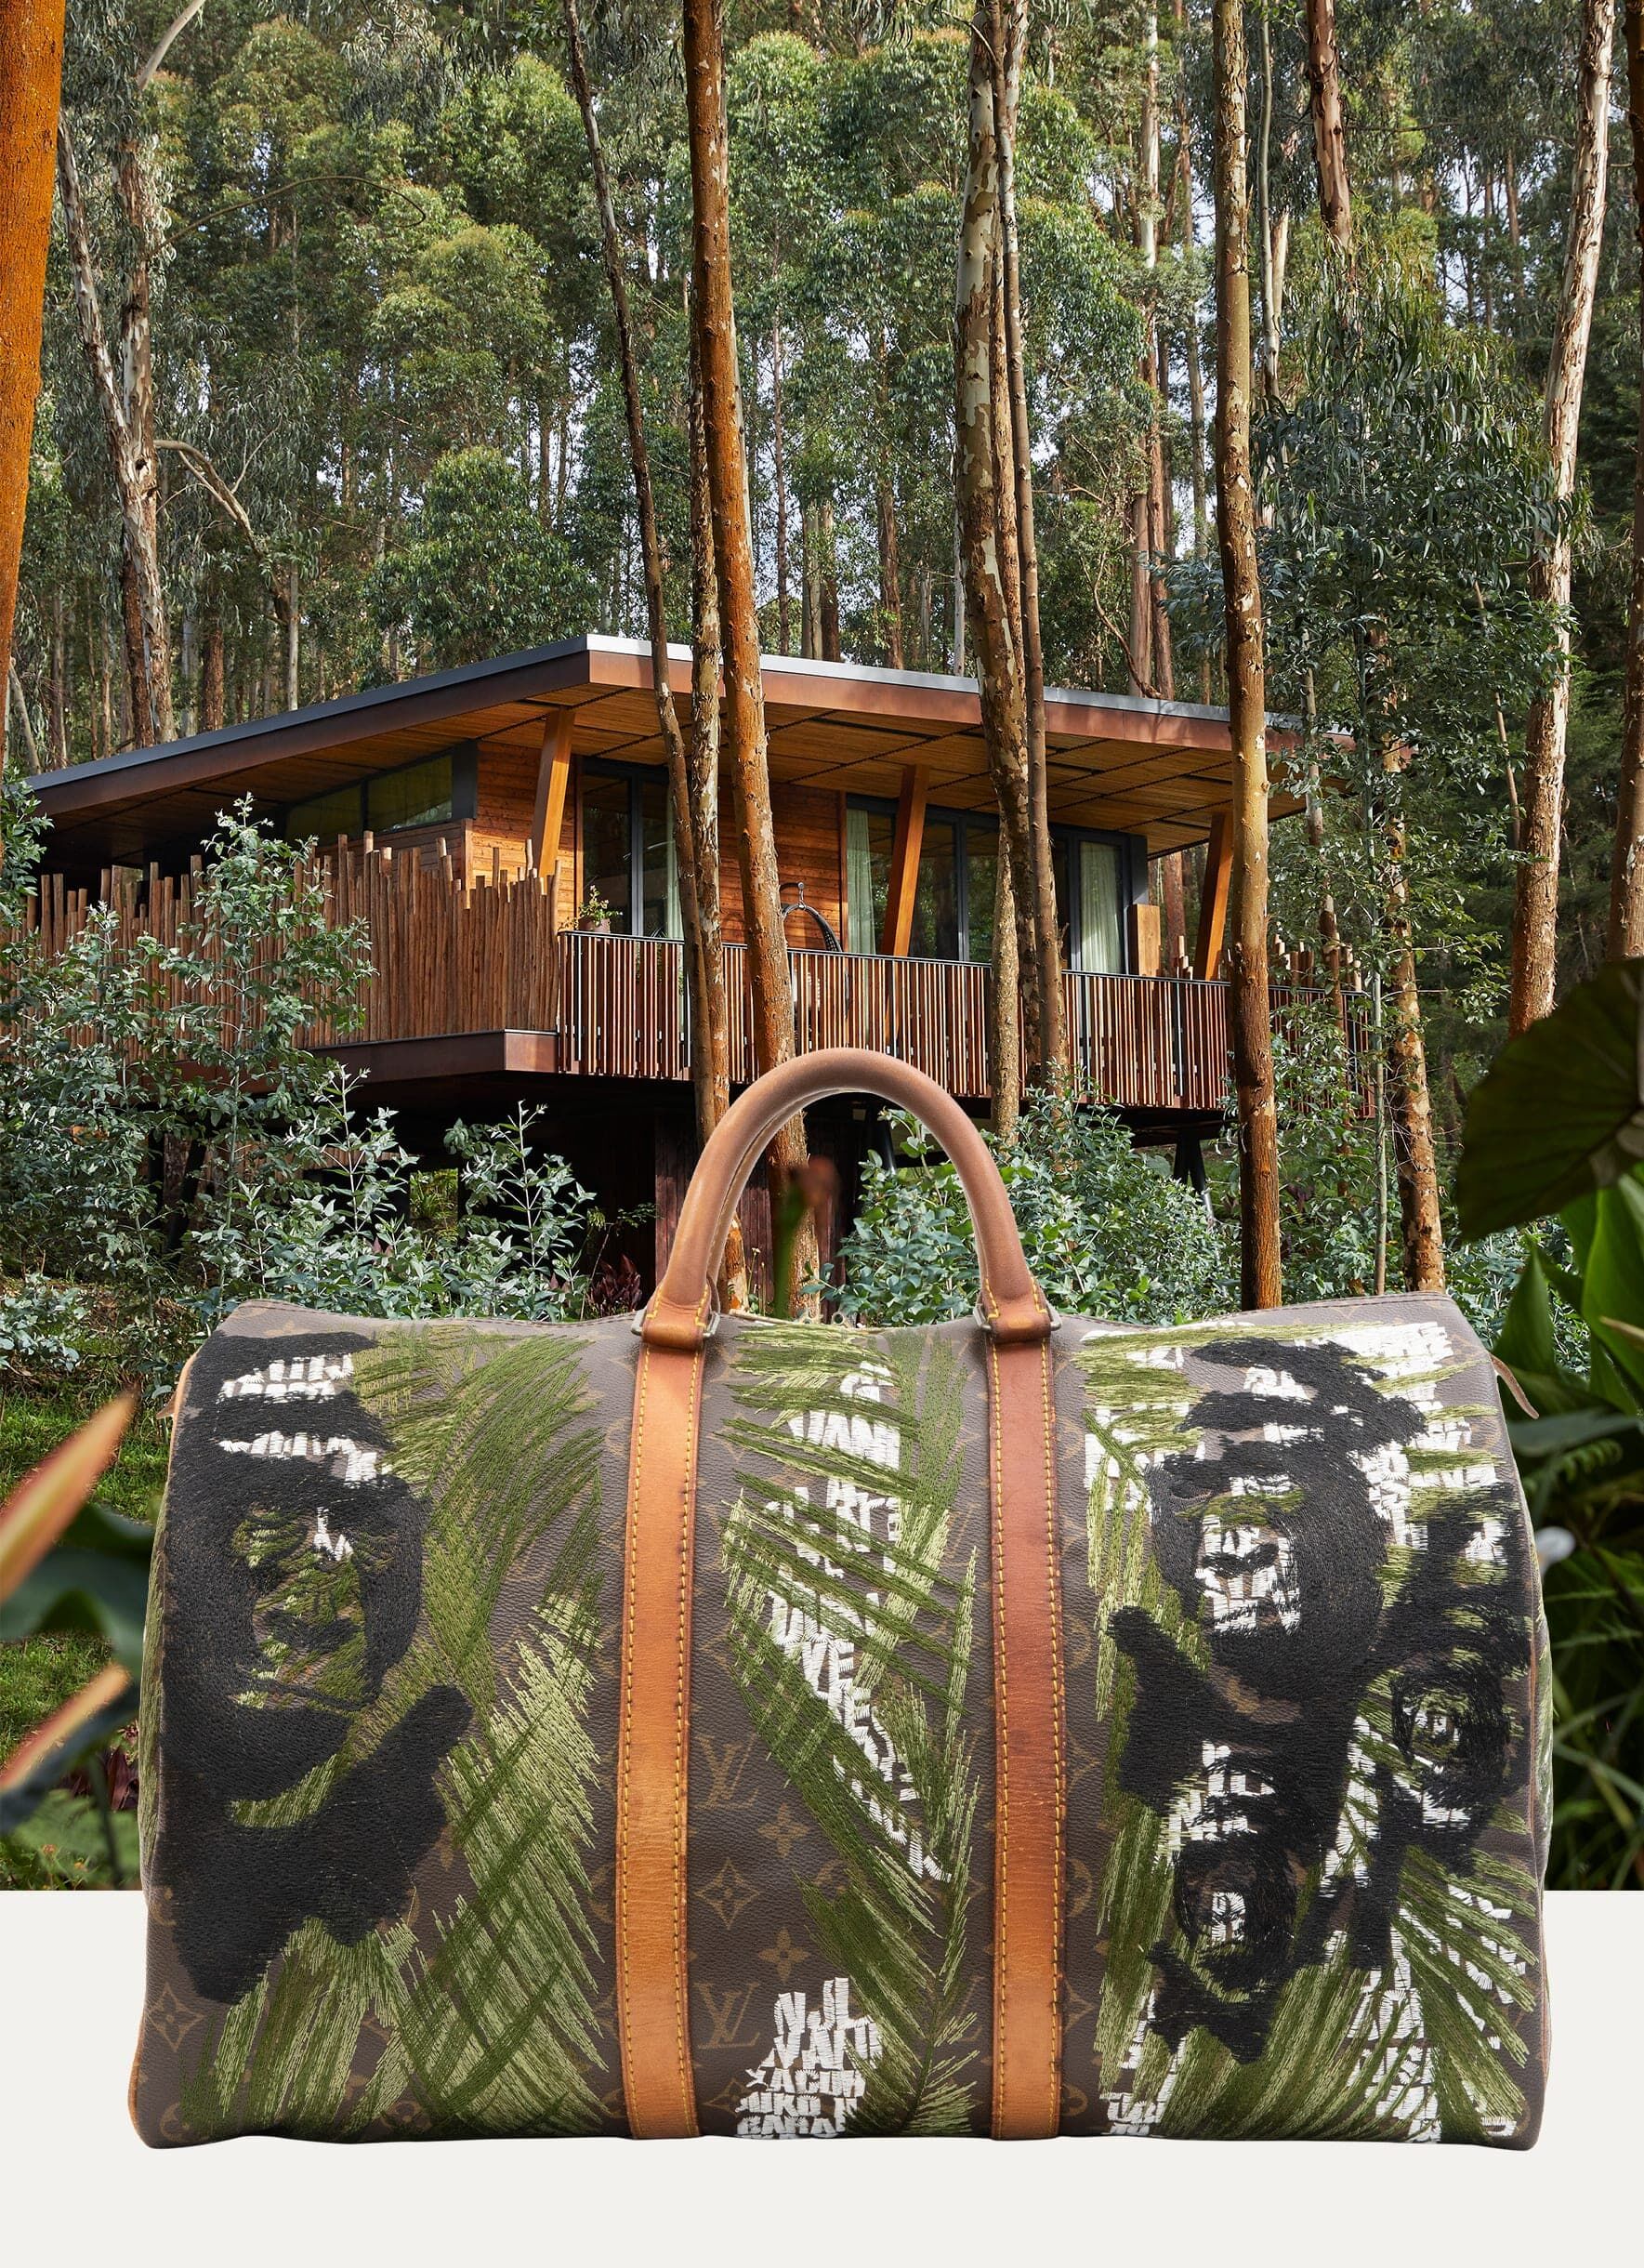 You Can Now Shop Exclusive Items From Louis Vuitton At This Luxury Resort